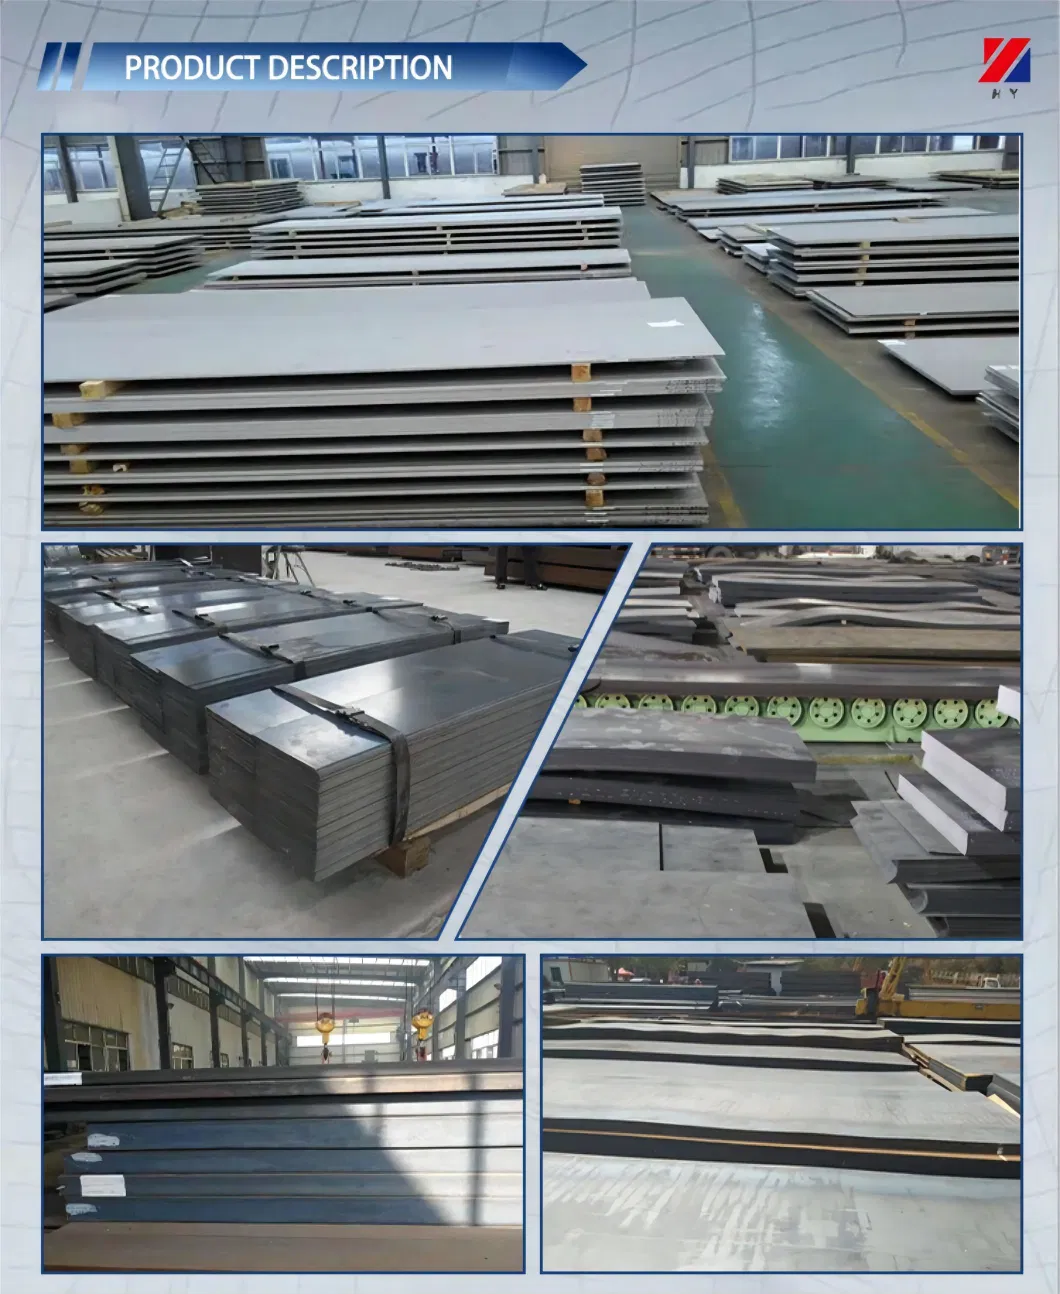 Steel Sheet/Carbon/Stainless Steel/Aluminum/Galvanized/Copper/Prepainted/Color Coated/Zinc Coated/Galvalume/Corrugated/Roof Tiles/Hot Cold Rolled Coil